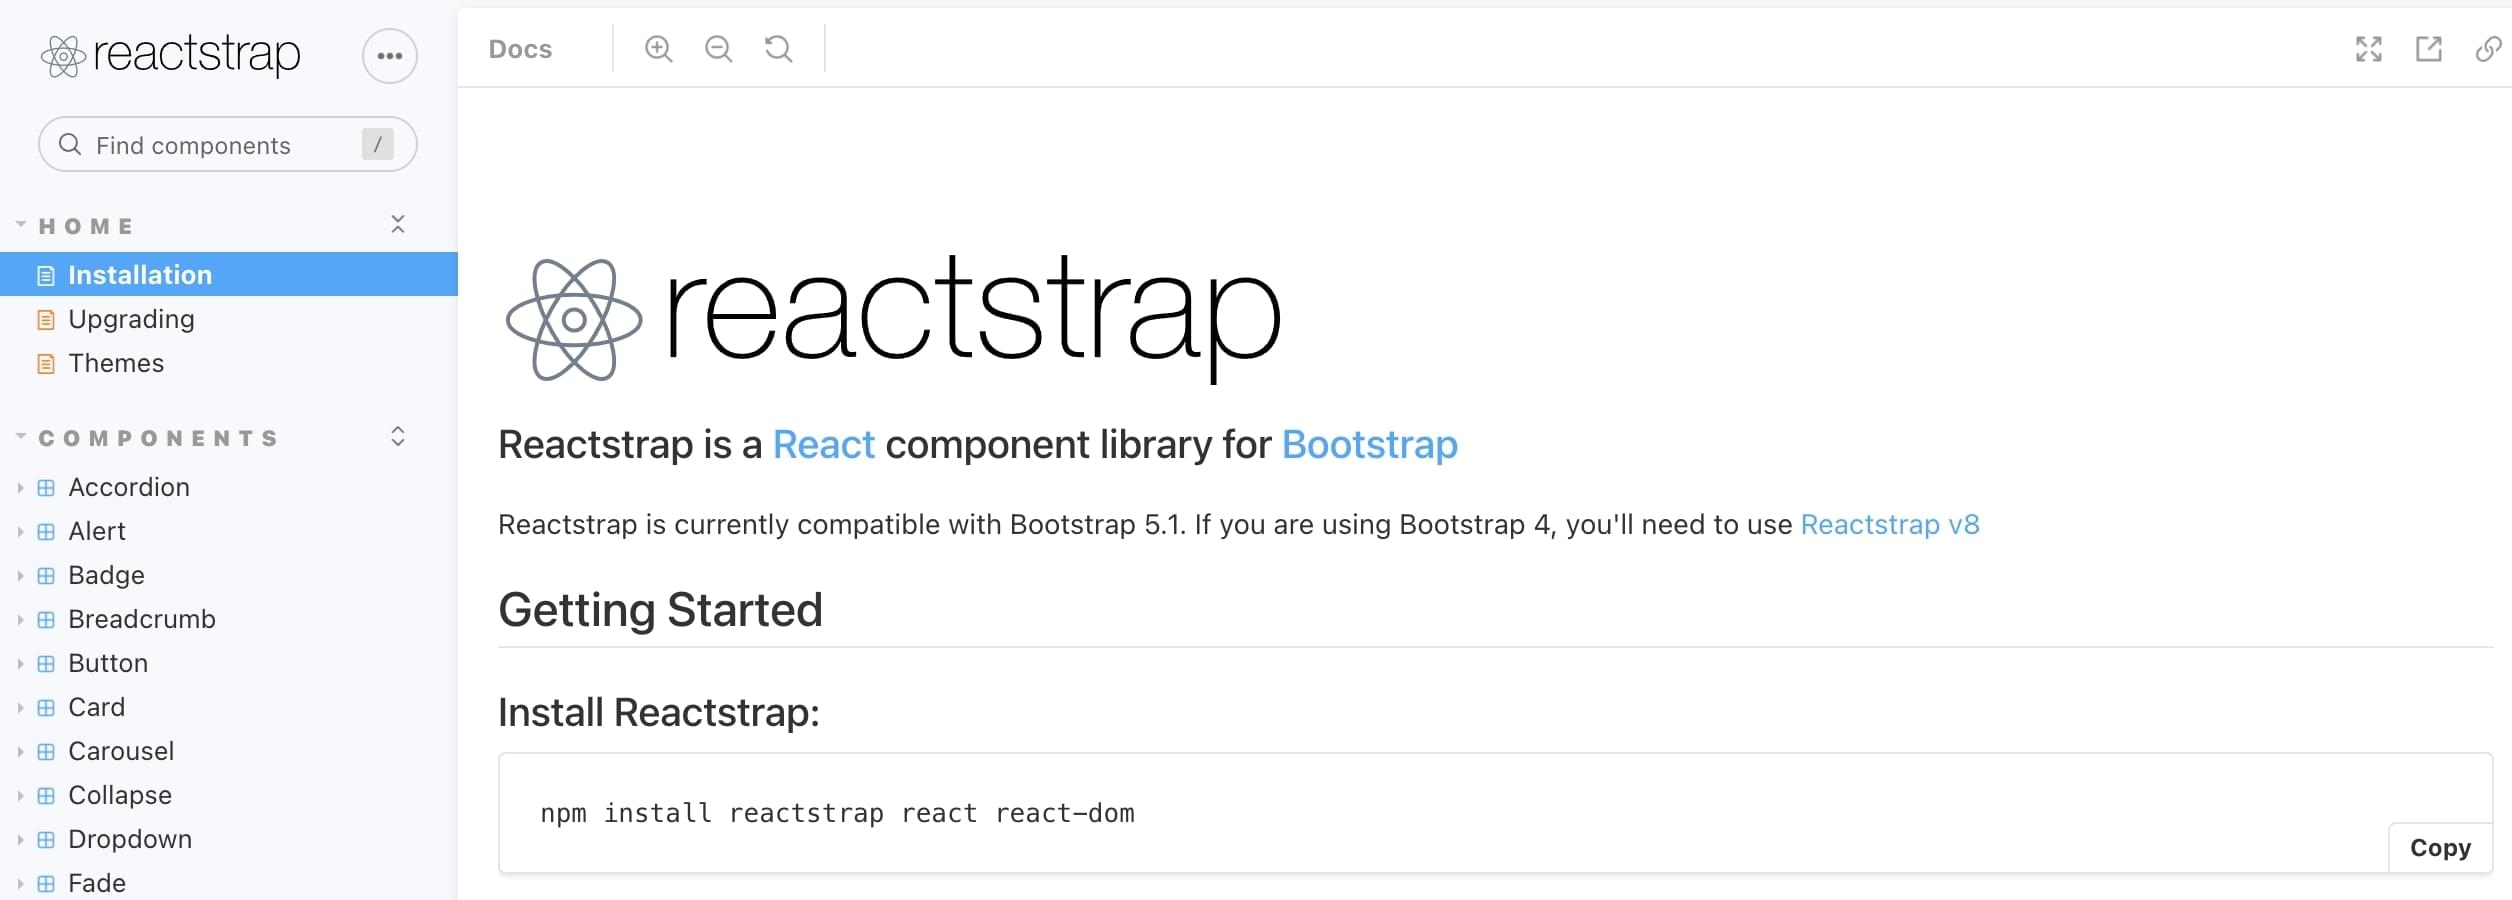 Reactstrap UI component library